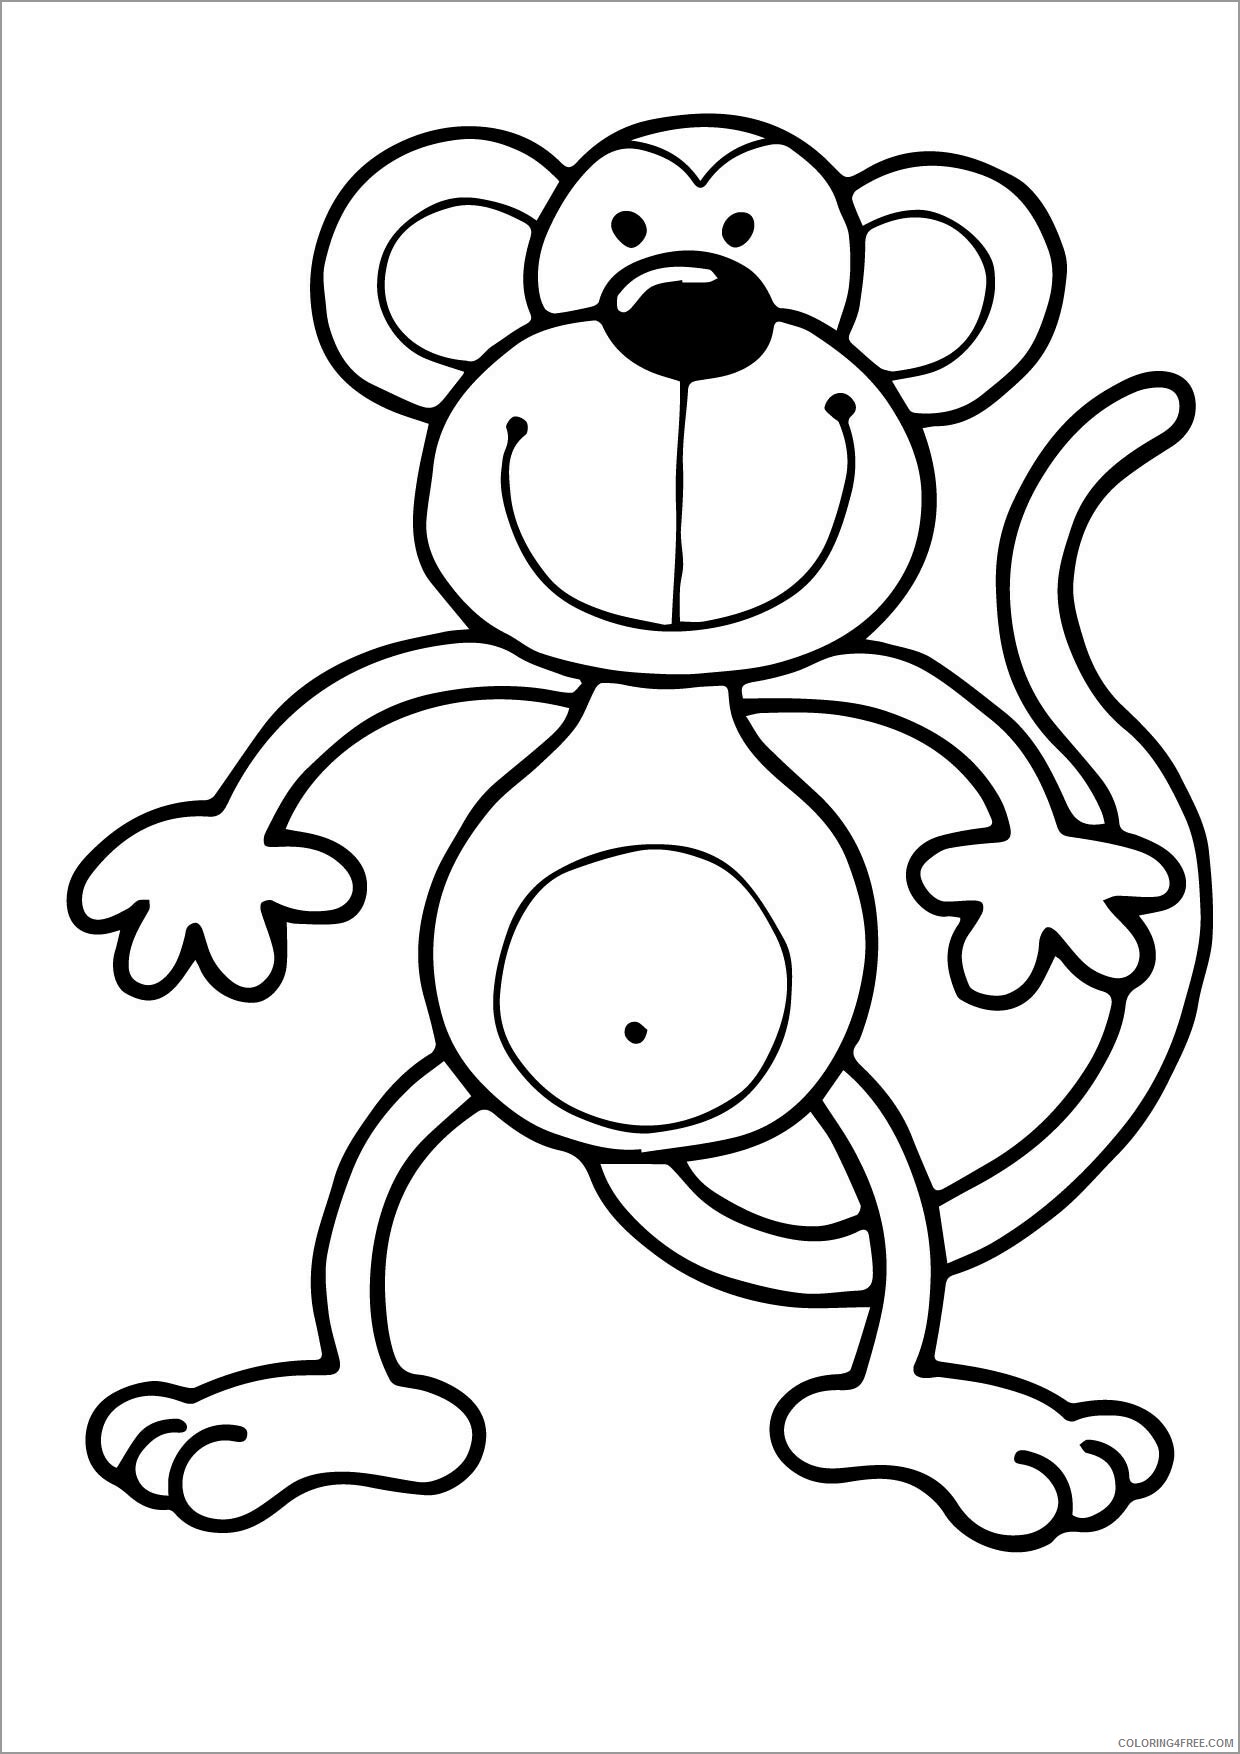 Preschool Animal Coloring Pages monkey for preschoolers Printable 2021 4863 Coloring4free